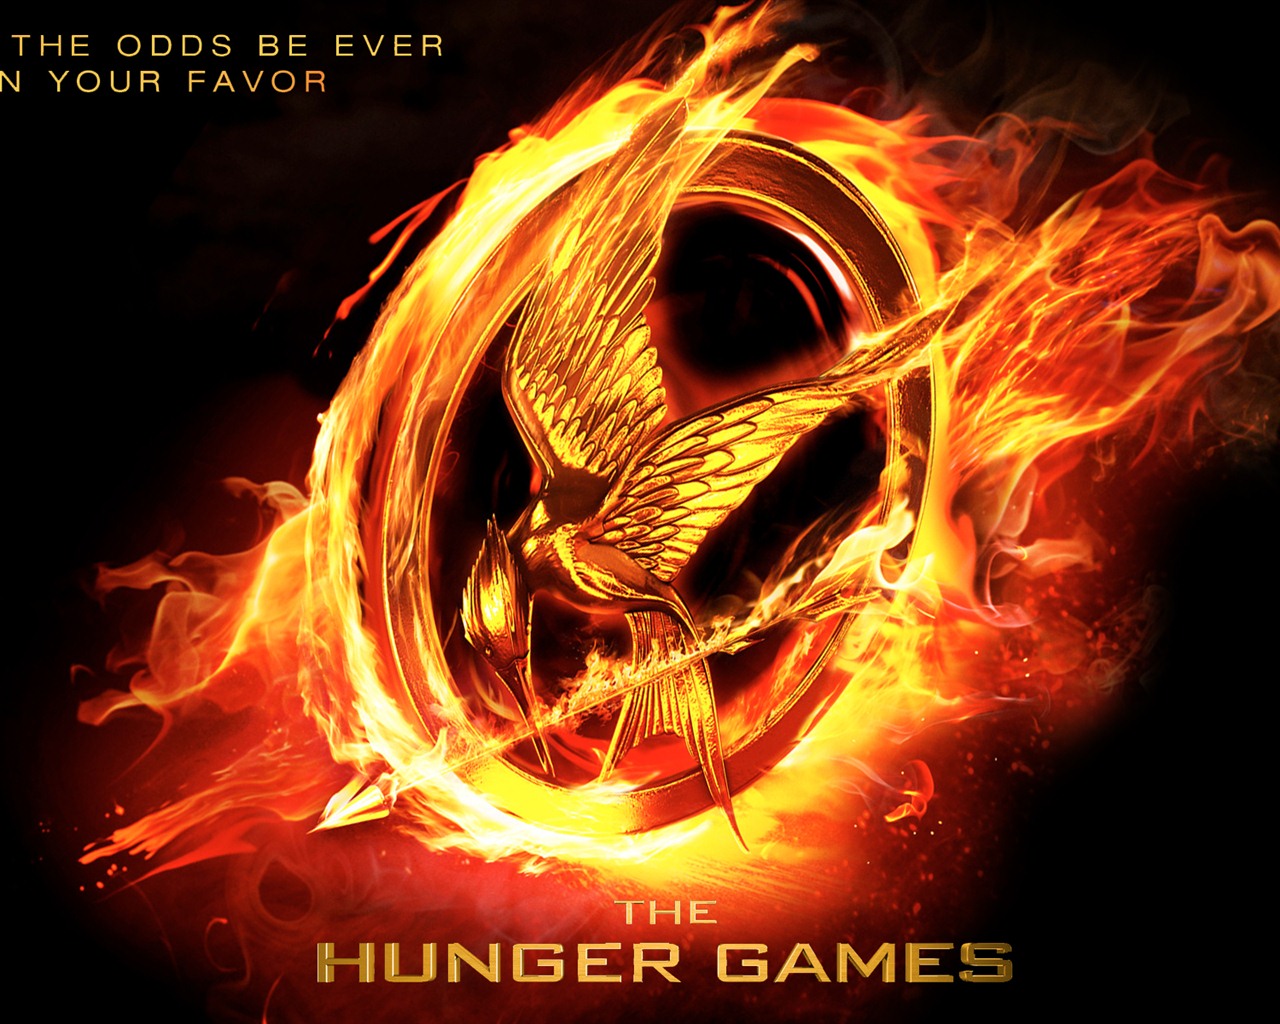 The Hunger Games HD wallpapers #13 - 1280x1024